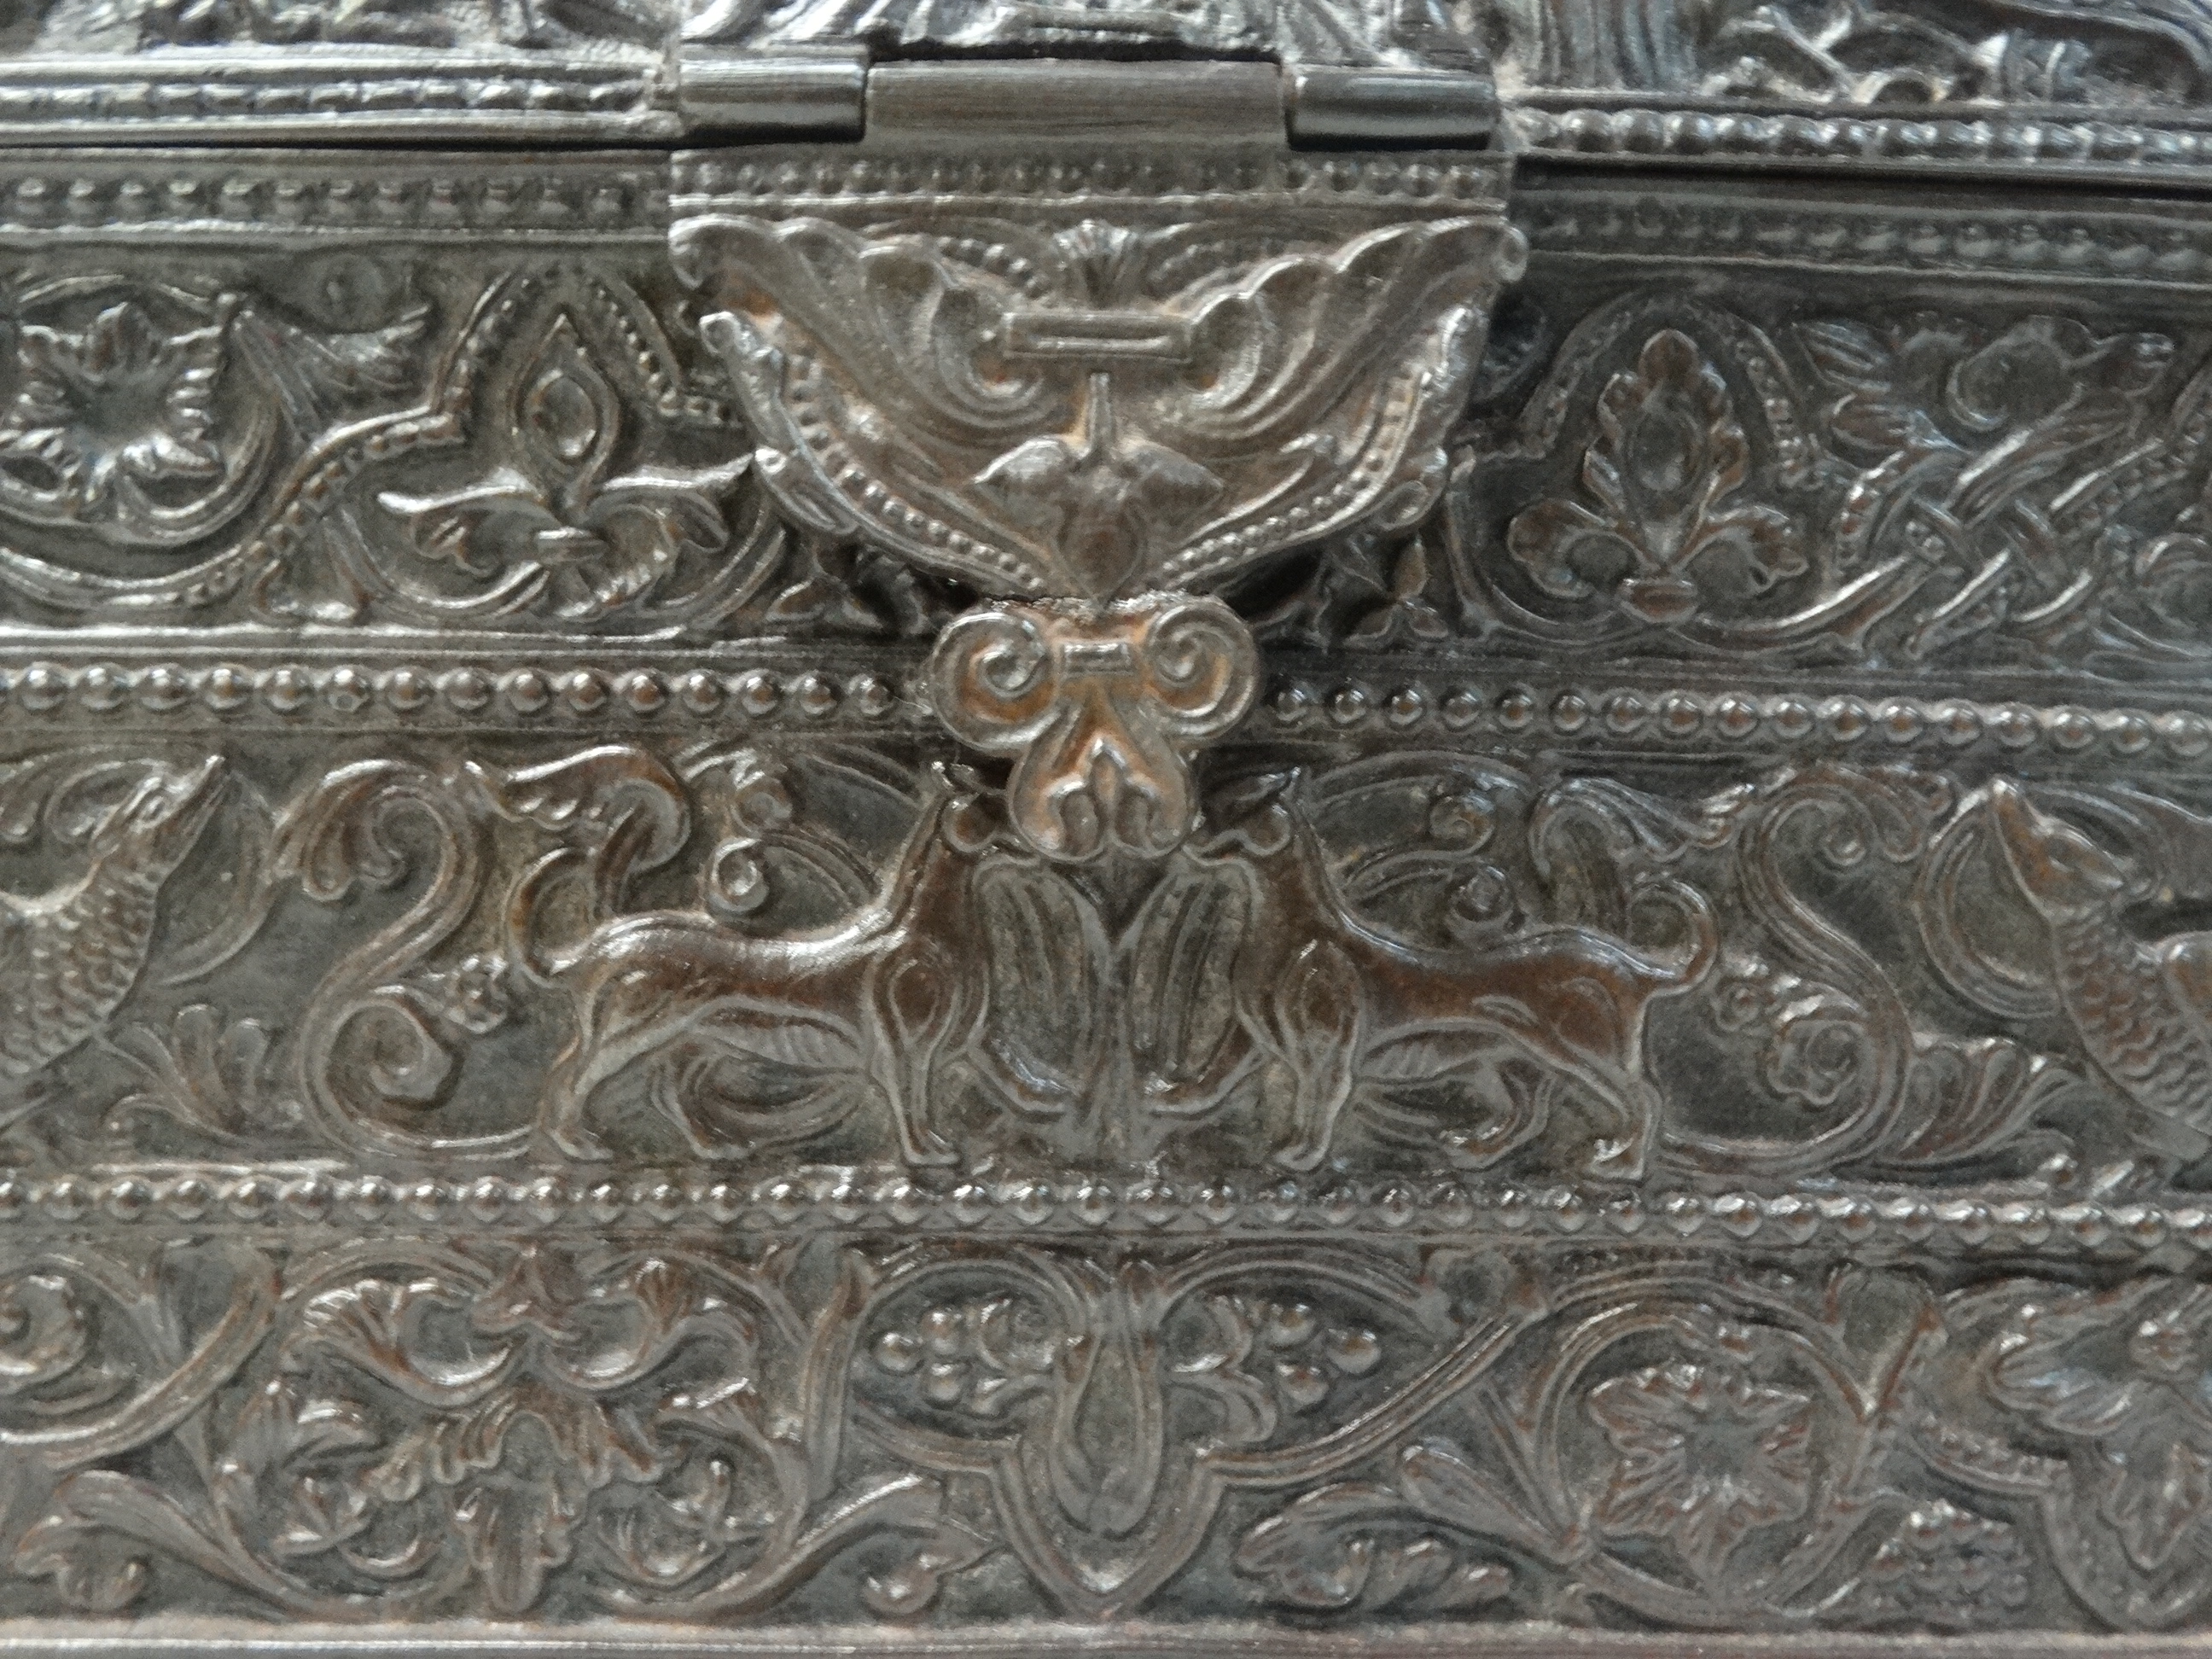 Mid 19th Century Bronze Casket - A patinated Gothic Revival bas relief bronze small casket, - Image 4 of 5